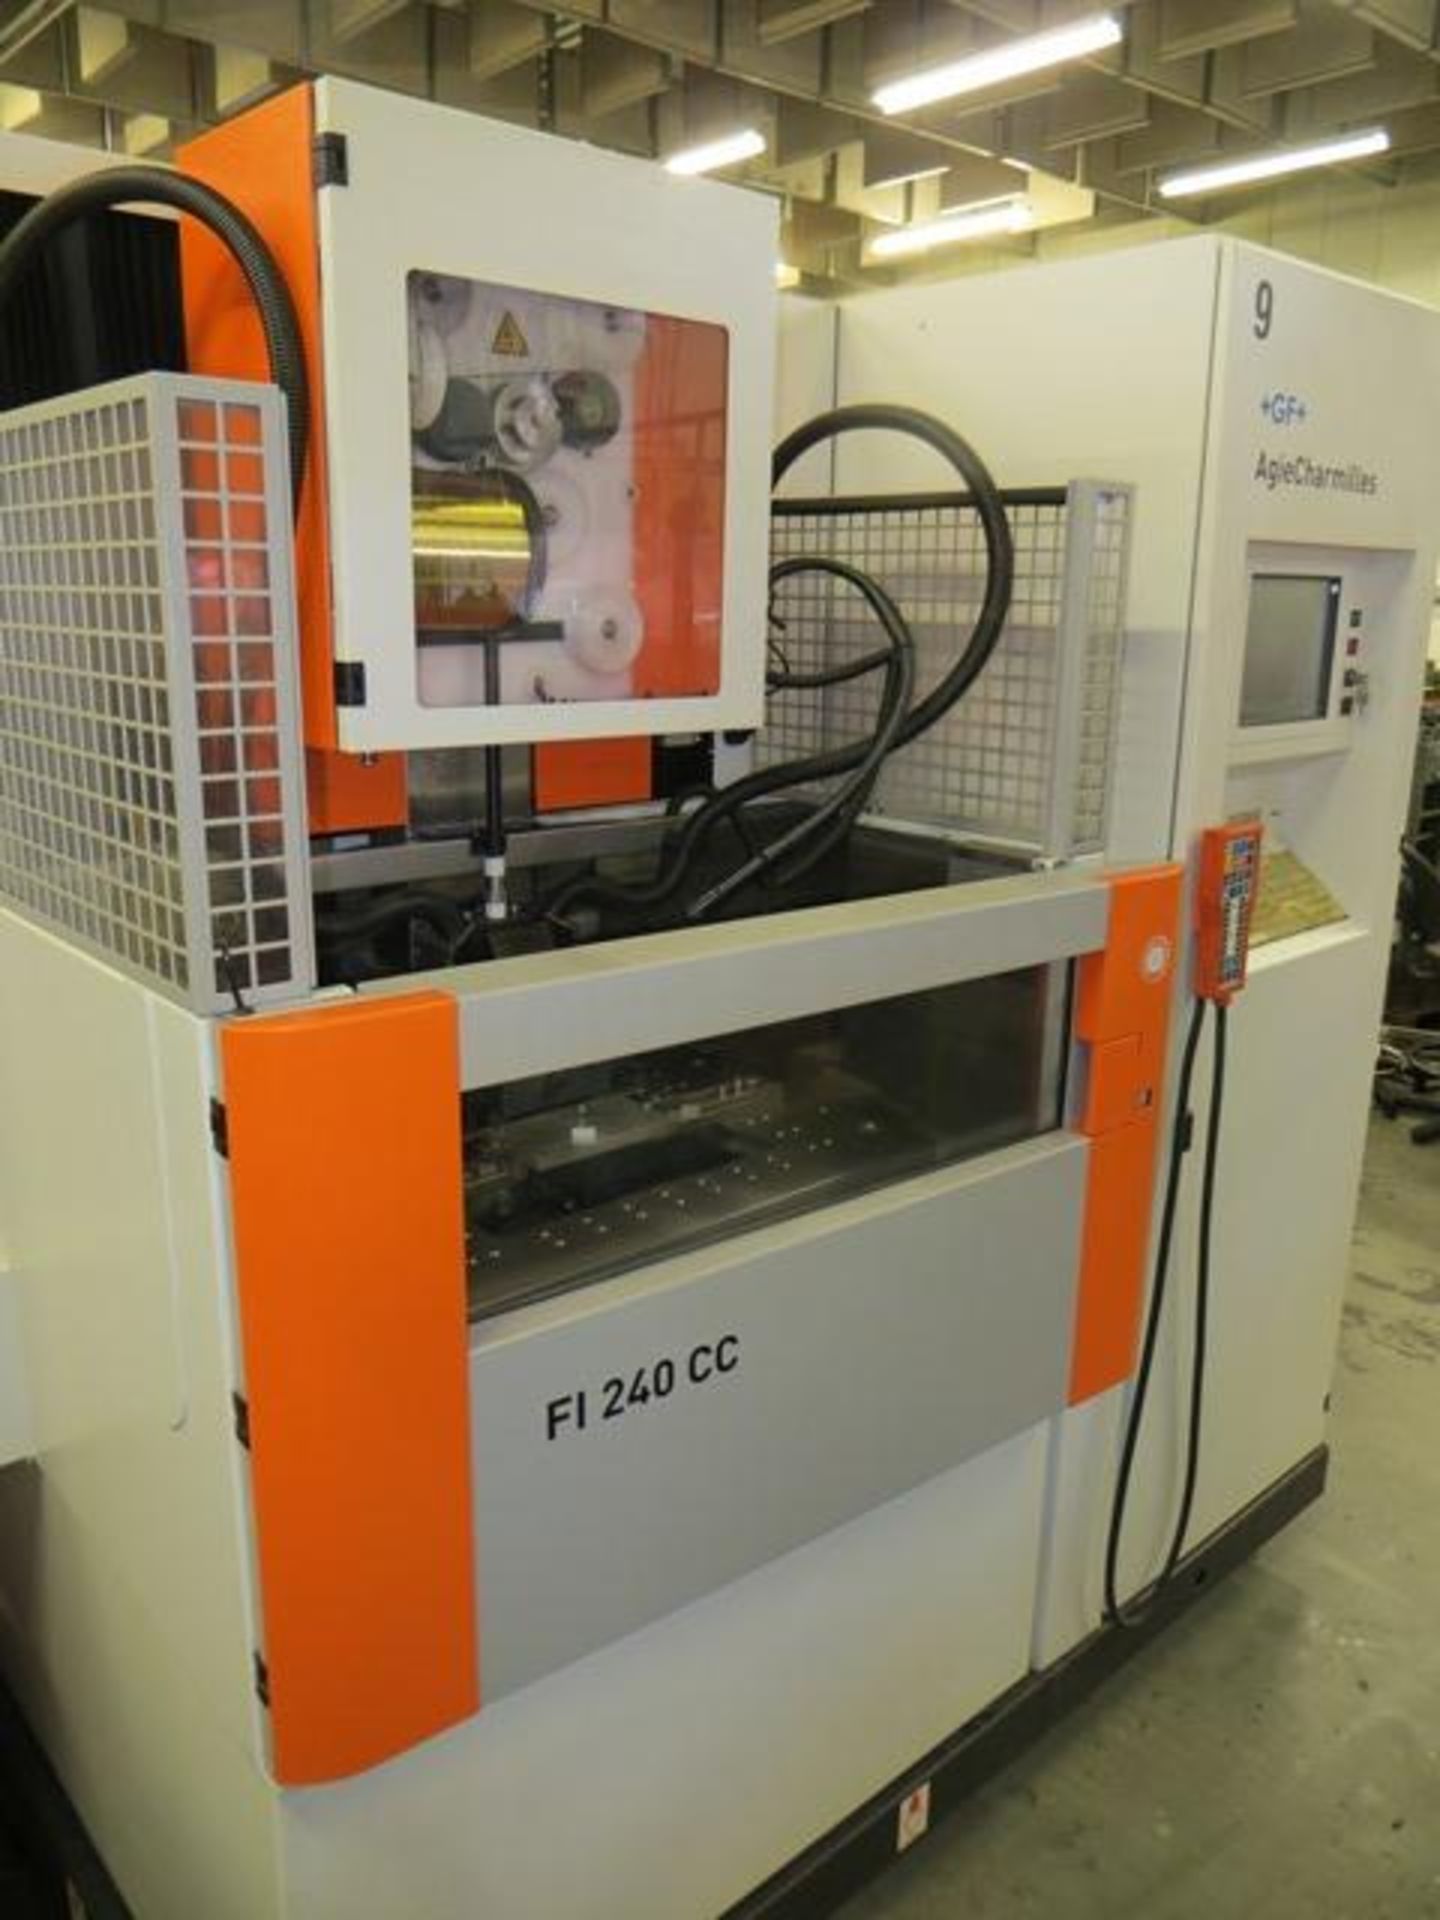 Agie Charmilles FI 240 CC clean cut wire eroder Year 2008 Serial no. 921774. *A work Method - Image 2 of 7